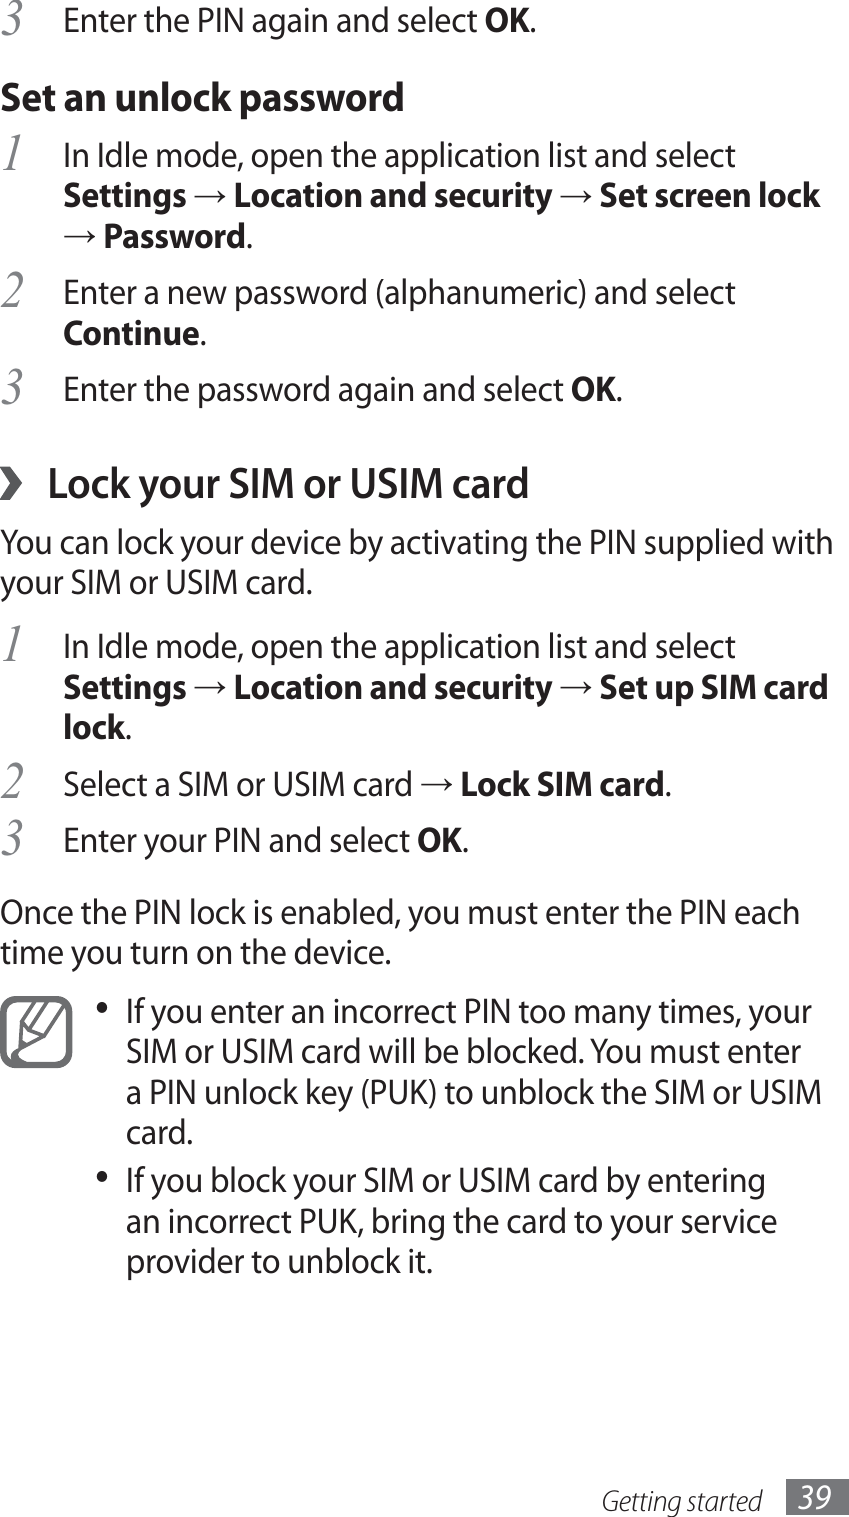 Getting started 39Enter the PIN again and select 3 OK.Set an unlock passwordIn Idle mode, open the application list and select 1 Settings → Location and security → Set screen lock → Password.Enter a new password (alphanumeric) and select 2 Continue.Enter the password again and select 3 OK.Lock your SIM or USIM card ›You can lock your device by activating the PIN supplied with your SIM or USIM card. In Idle mode, open the application list and select 1 Settings → Location and security → Set up SIM card lock.Select a SIM or USIM card 2 → Lock SIM card.Enter your PIN and select 3 OK.Once the PIN lock is enabled, you must enter the PIN each time you turn on the device.If you enter an incorrect PIN too many times, your • SIM or USIM card will be blocked. You must enter a PIN unlock key (PUK) to unblock the SIM or USIM card. If you block your SIM or USIM card by entering • an incorrect PUK, bring the card to your service provider to unblock it.